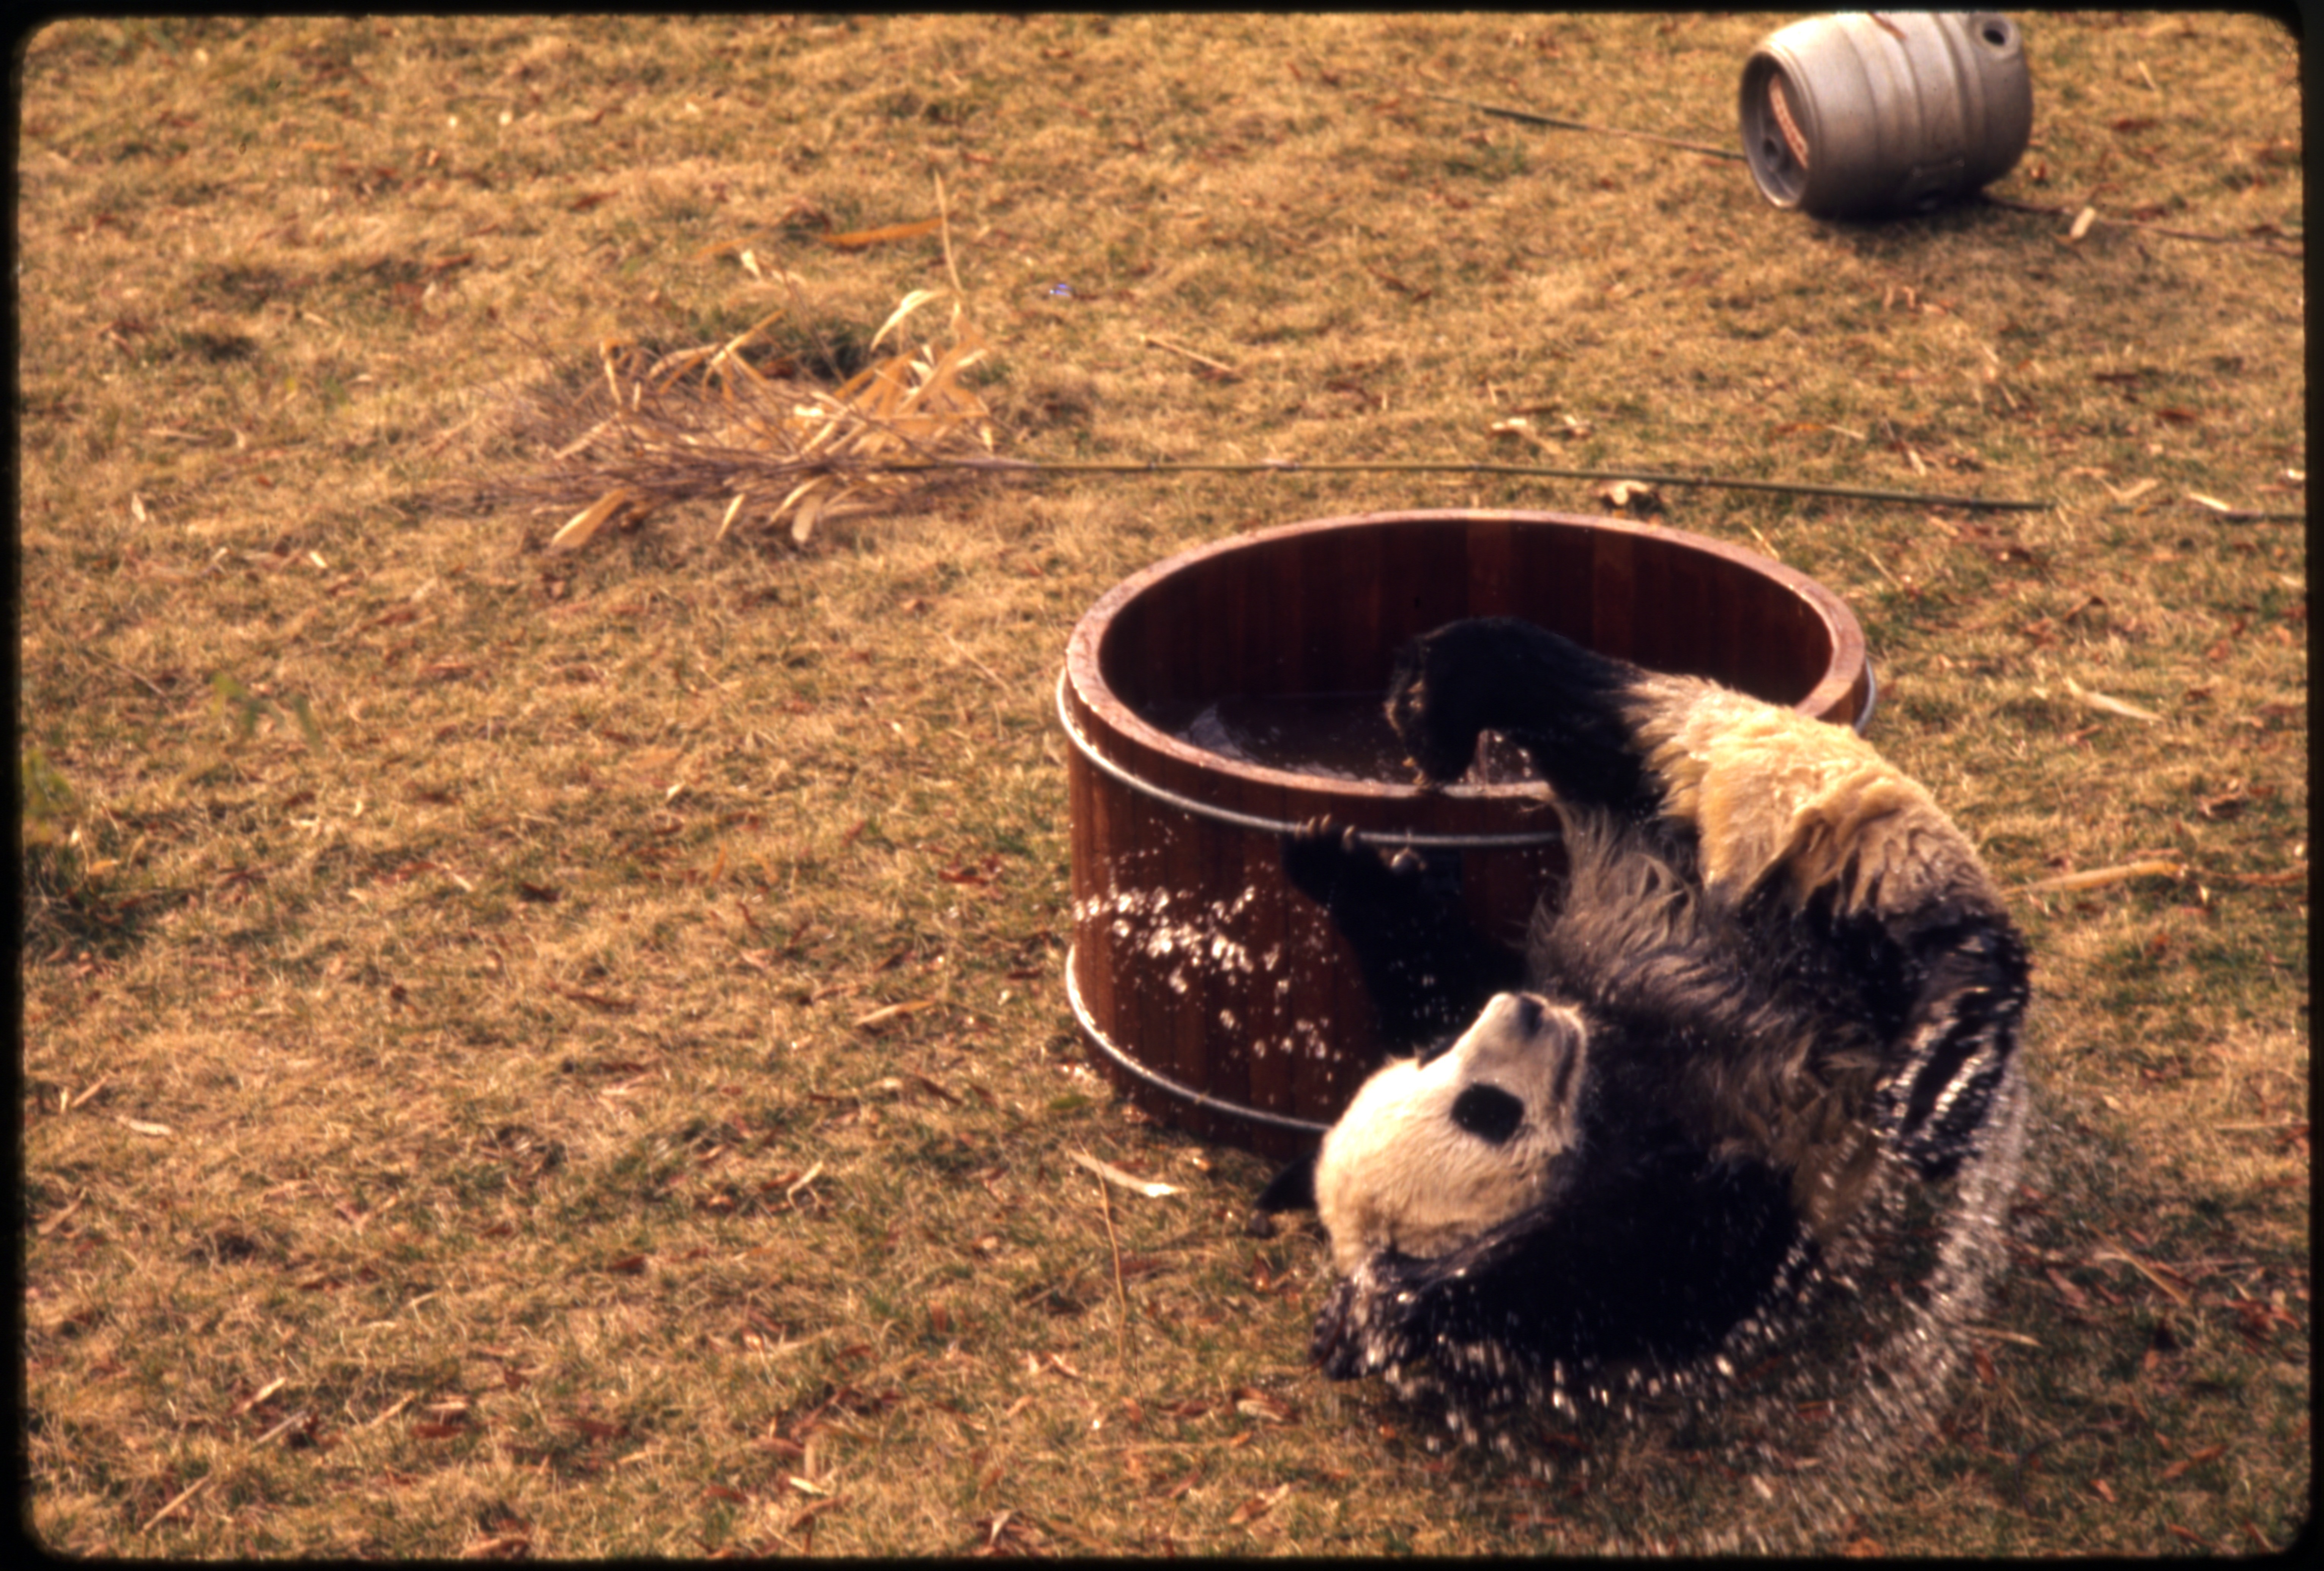 A giant panda falls from the rim of its bathtub. Water splashes out.